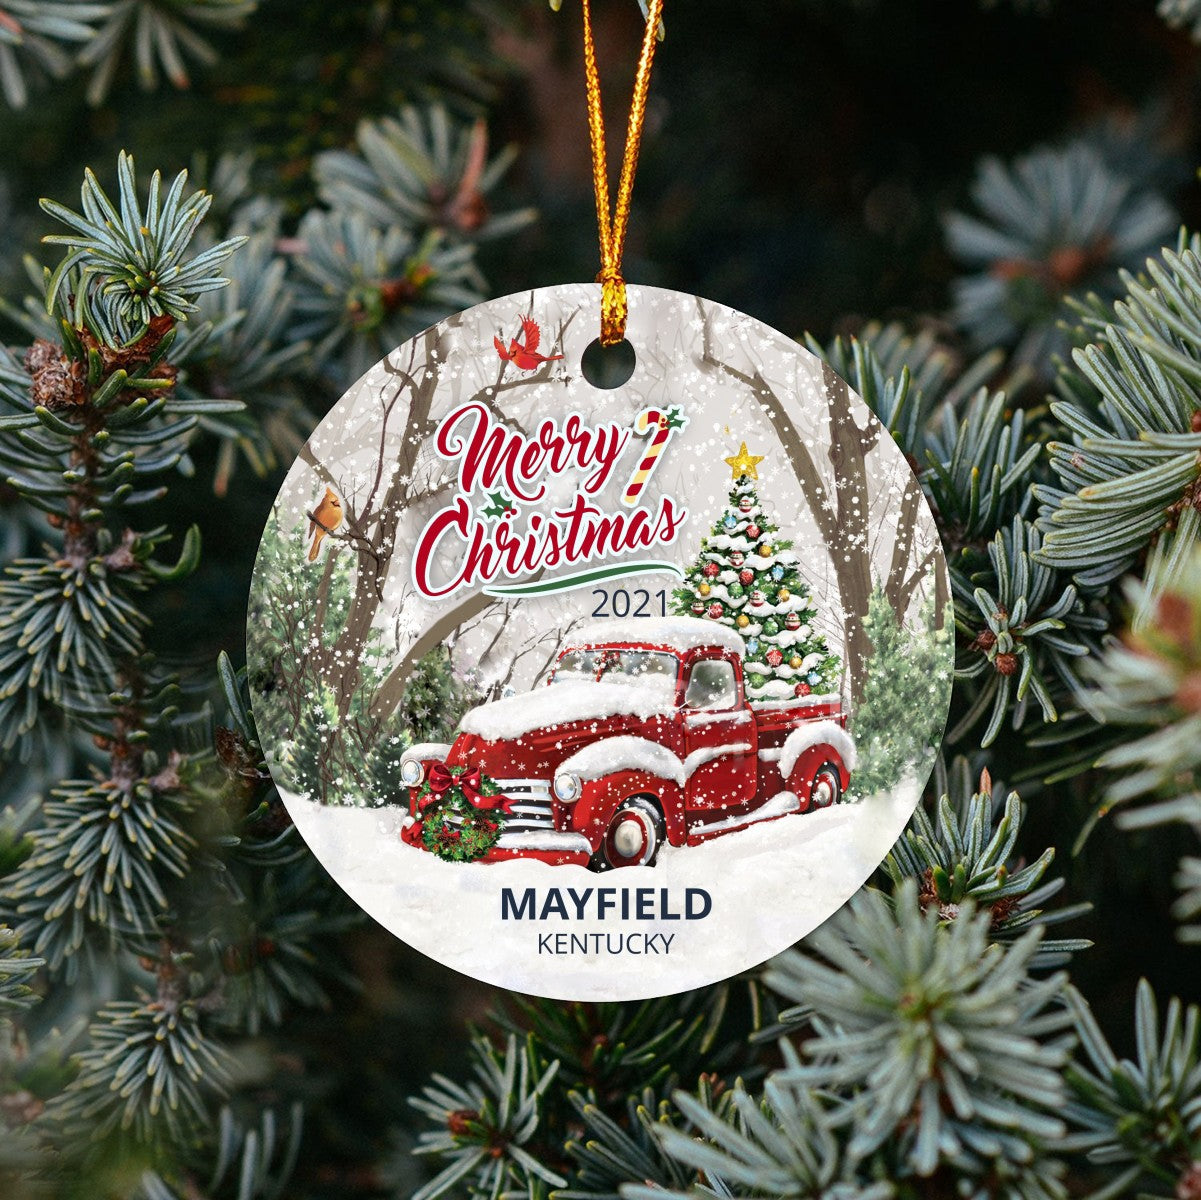 Christmas Tree Ornaments Mayfield - Ornament Customize With Name City And State Mayfield Kentucky KY - Red Truck Xmas Ornaments 3'' Plastic Gift For Family, Friend And Housewarming